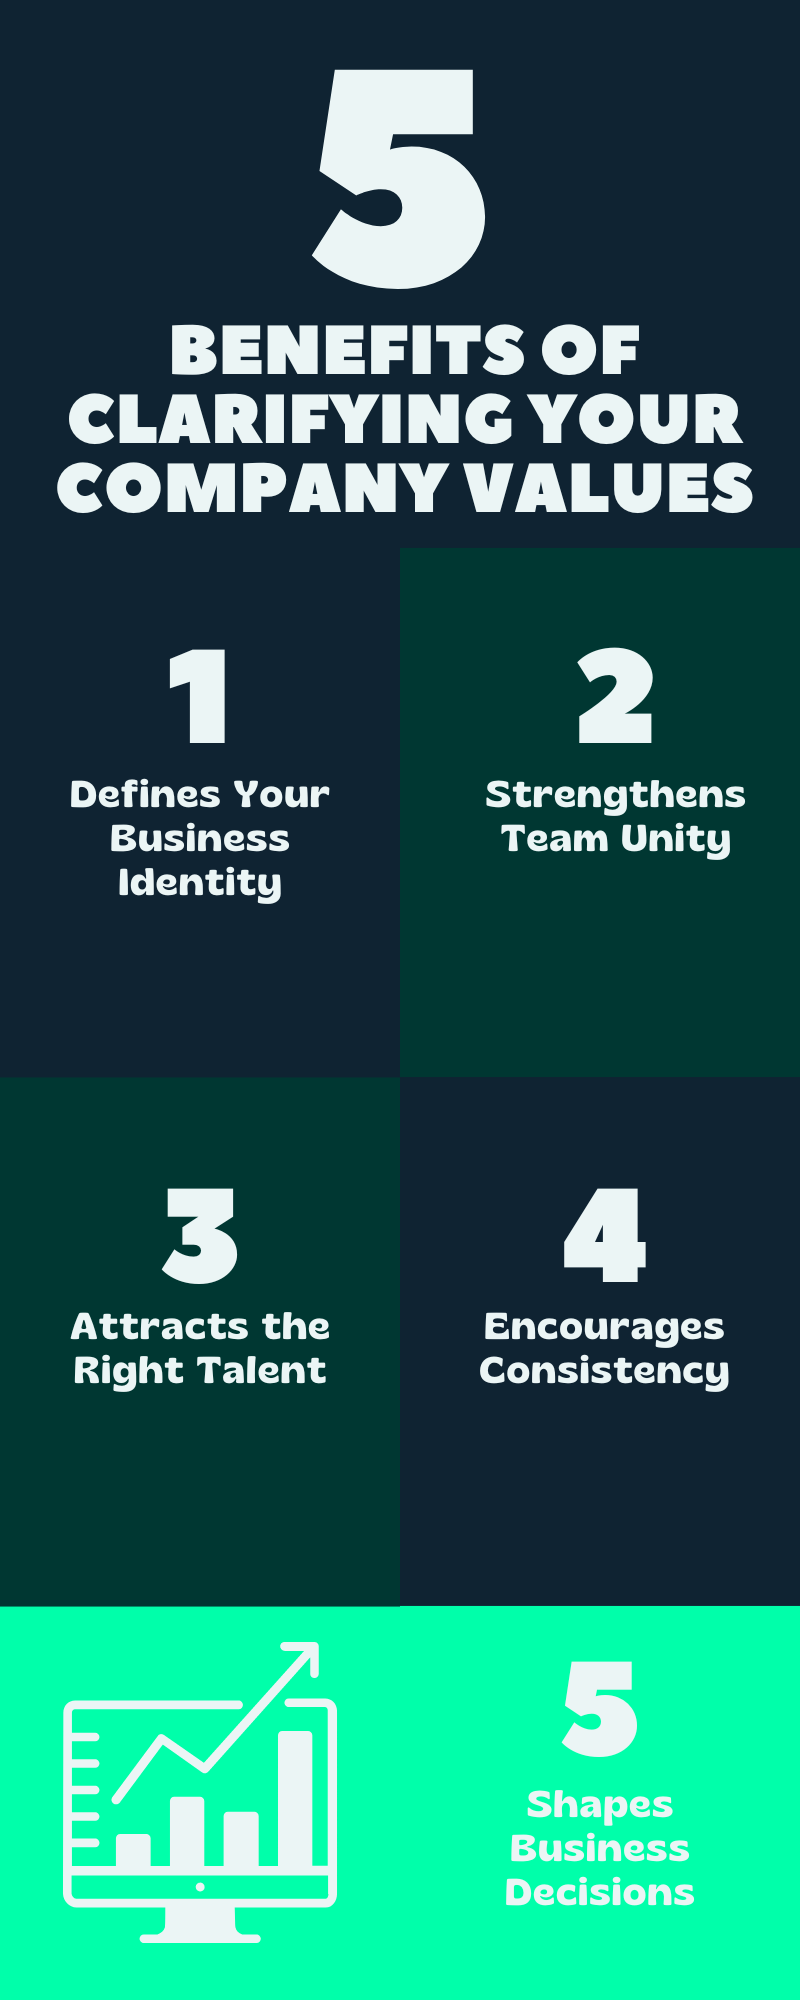 5 BENEFITS OF CLARIFYING YOUR COMPANY VALUES